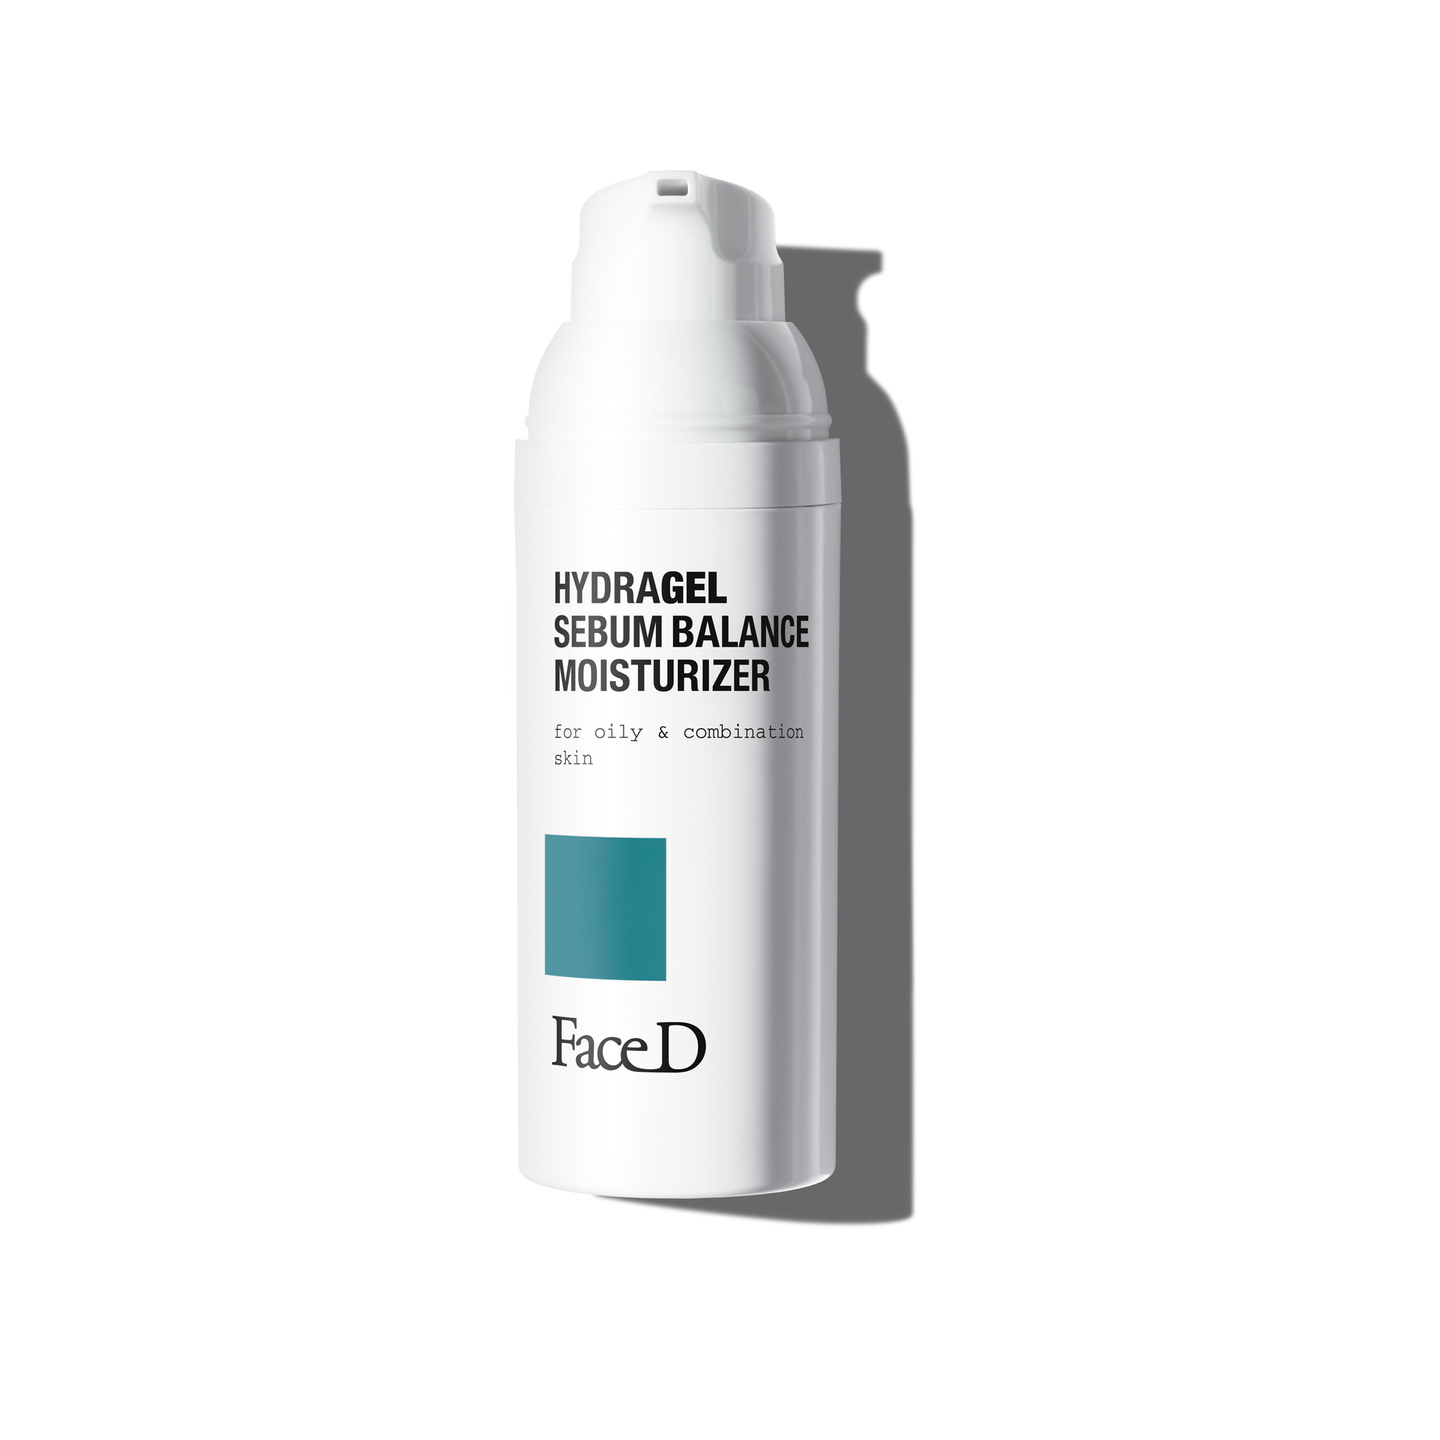 HYDRAGEL FACE CREAM FOR OILY AND COMBINATION SKIN - 50ml